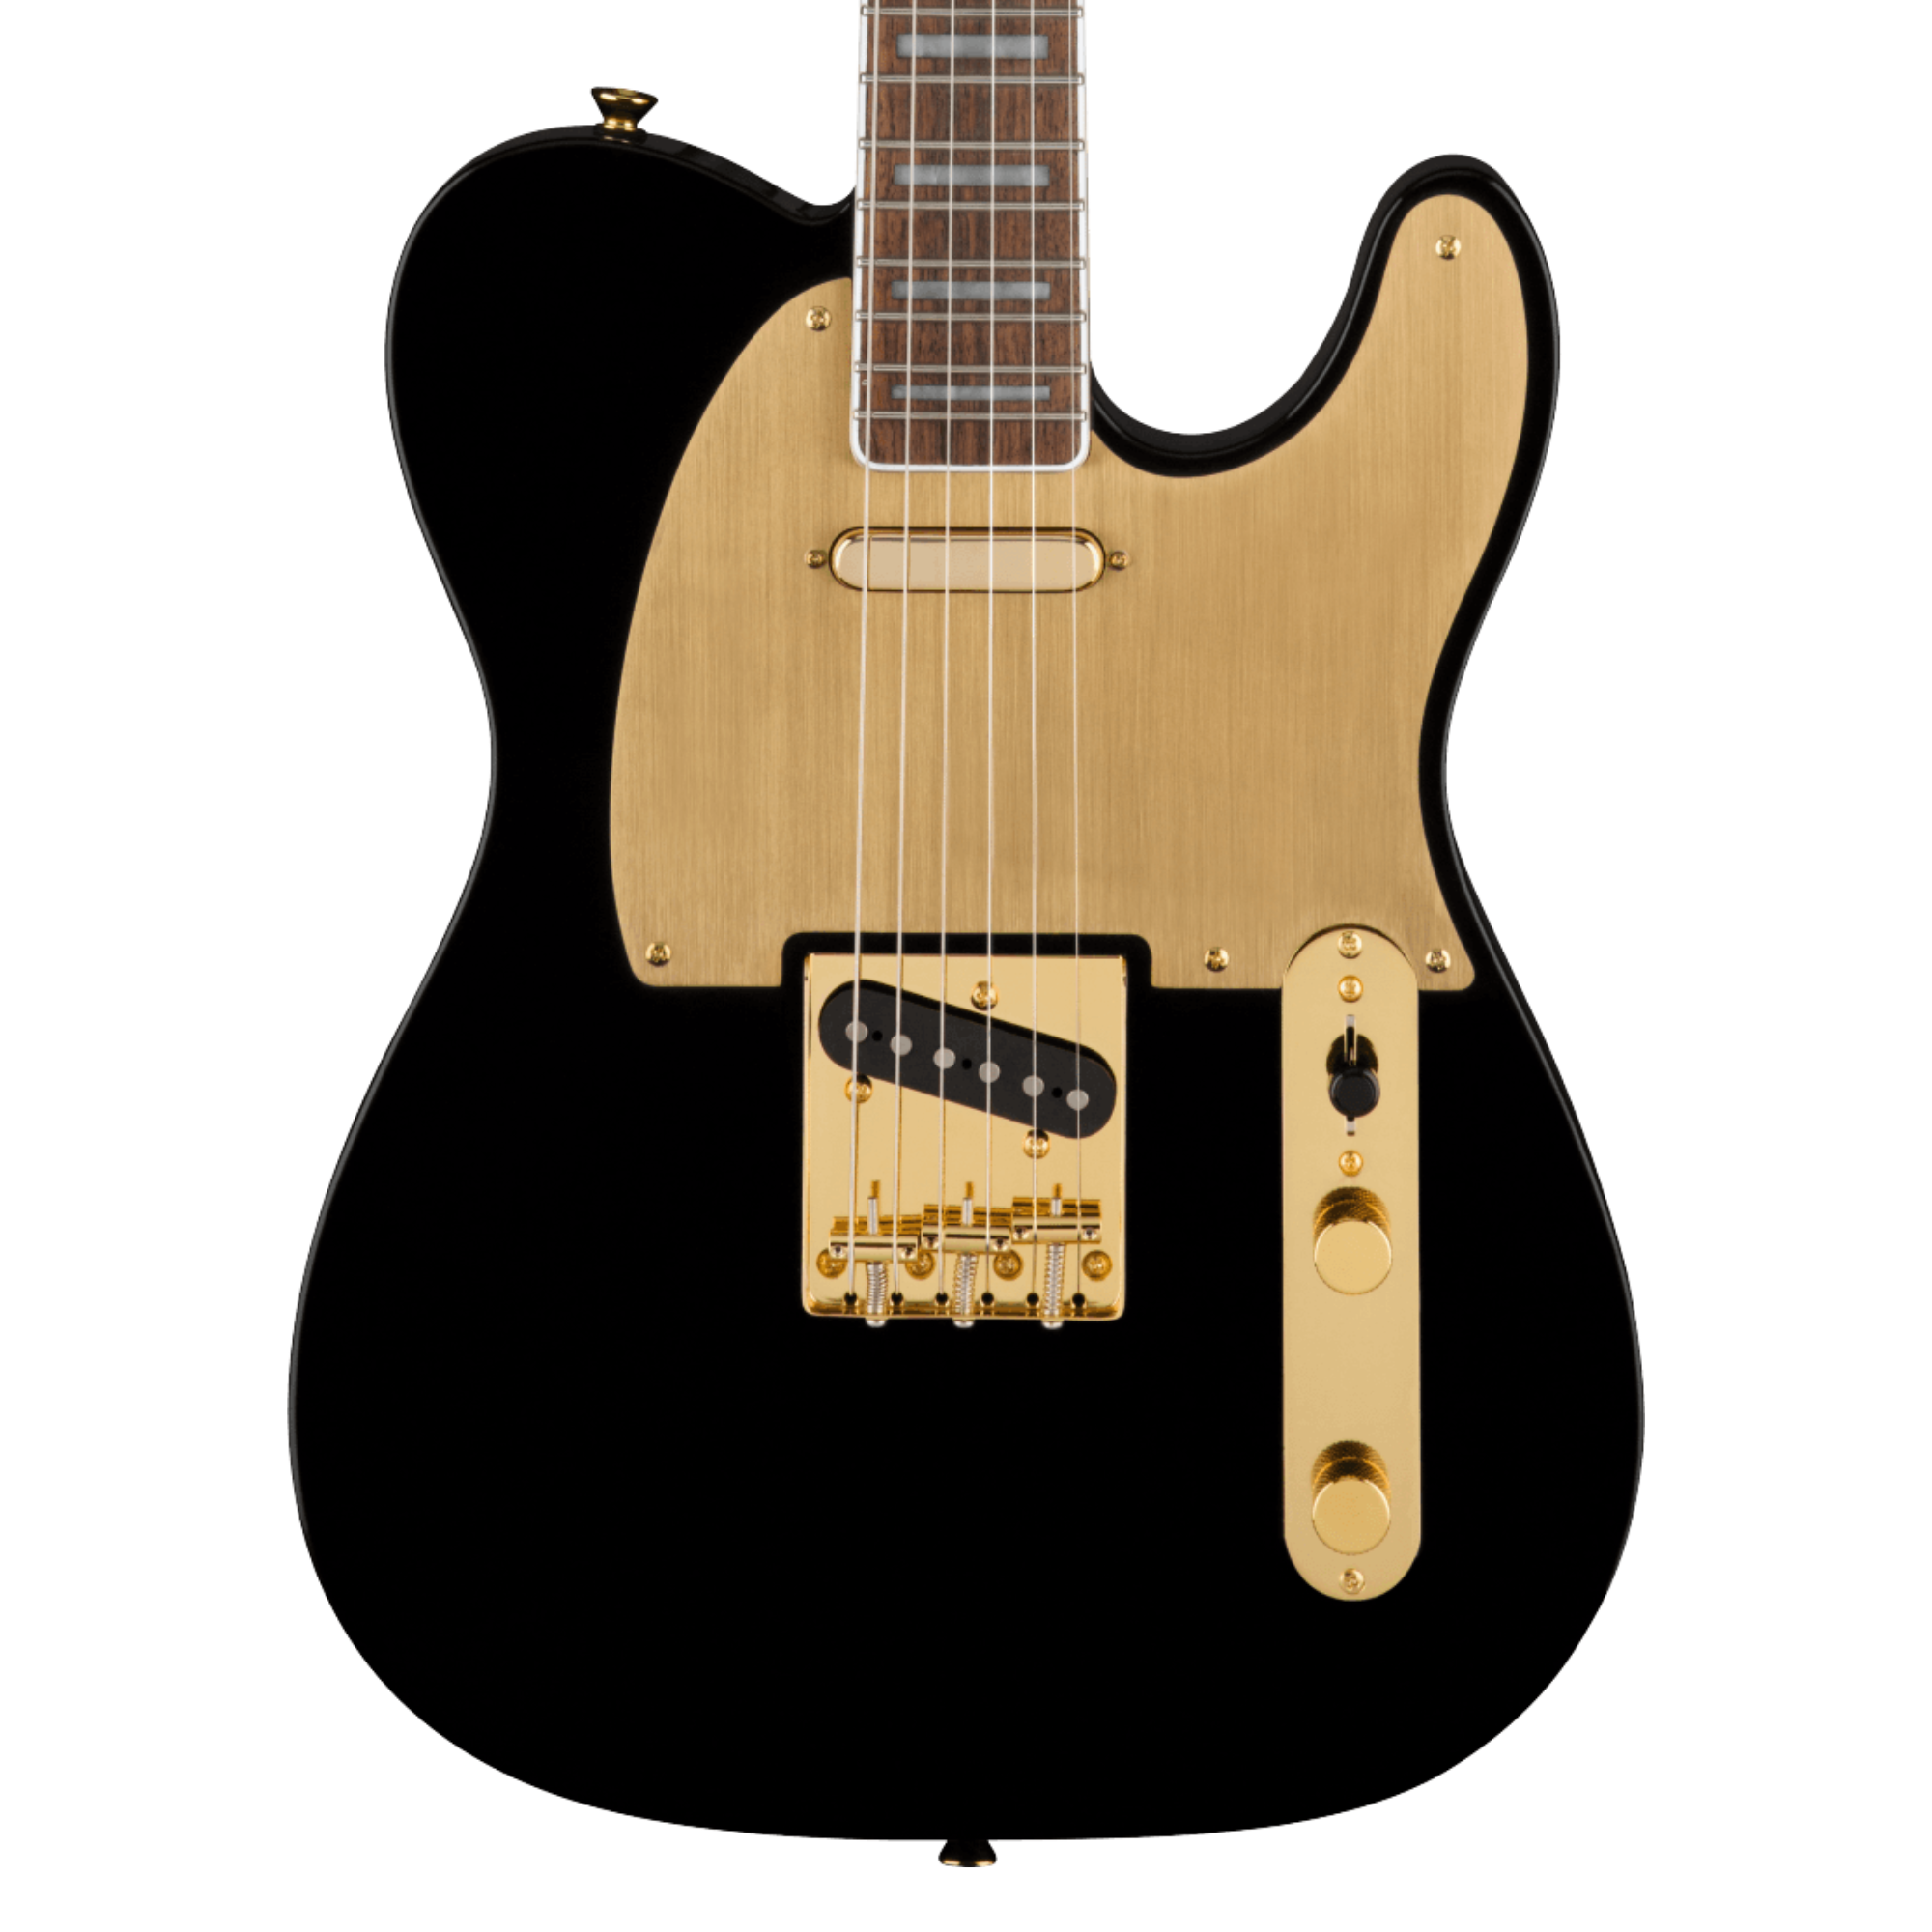 Squier 40th Anniversary Telecaster, Gold Edition, Black